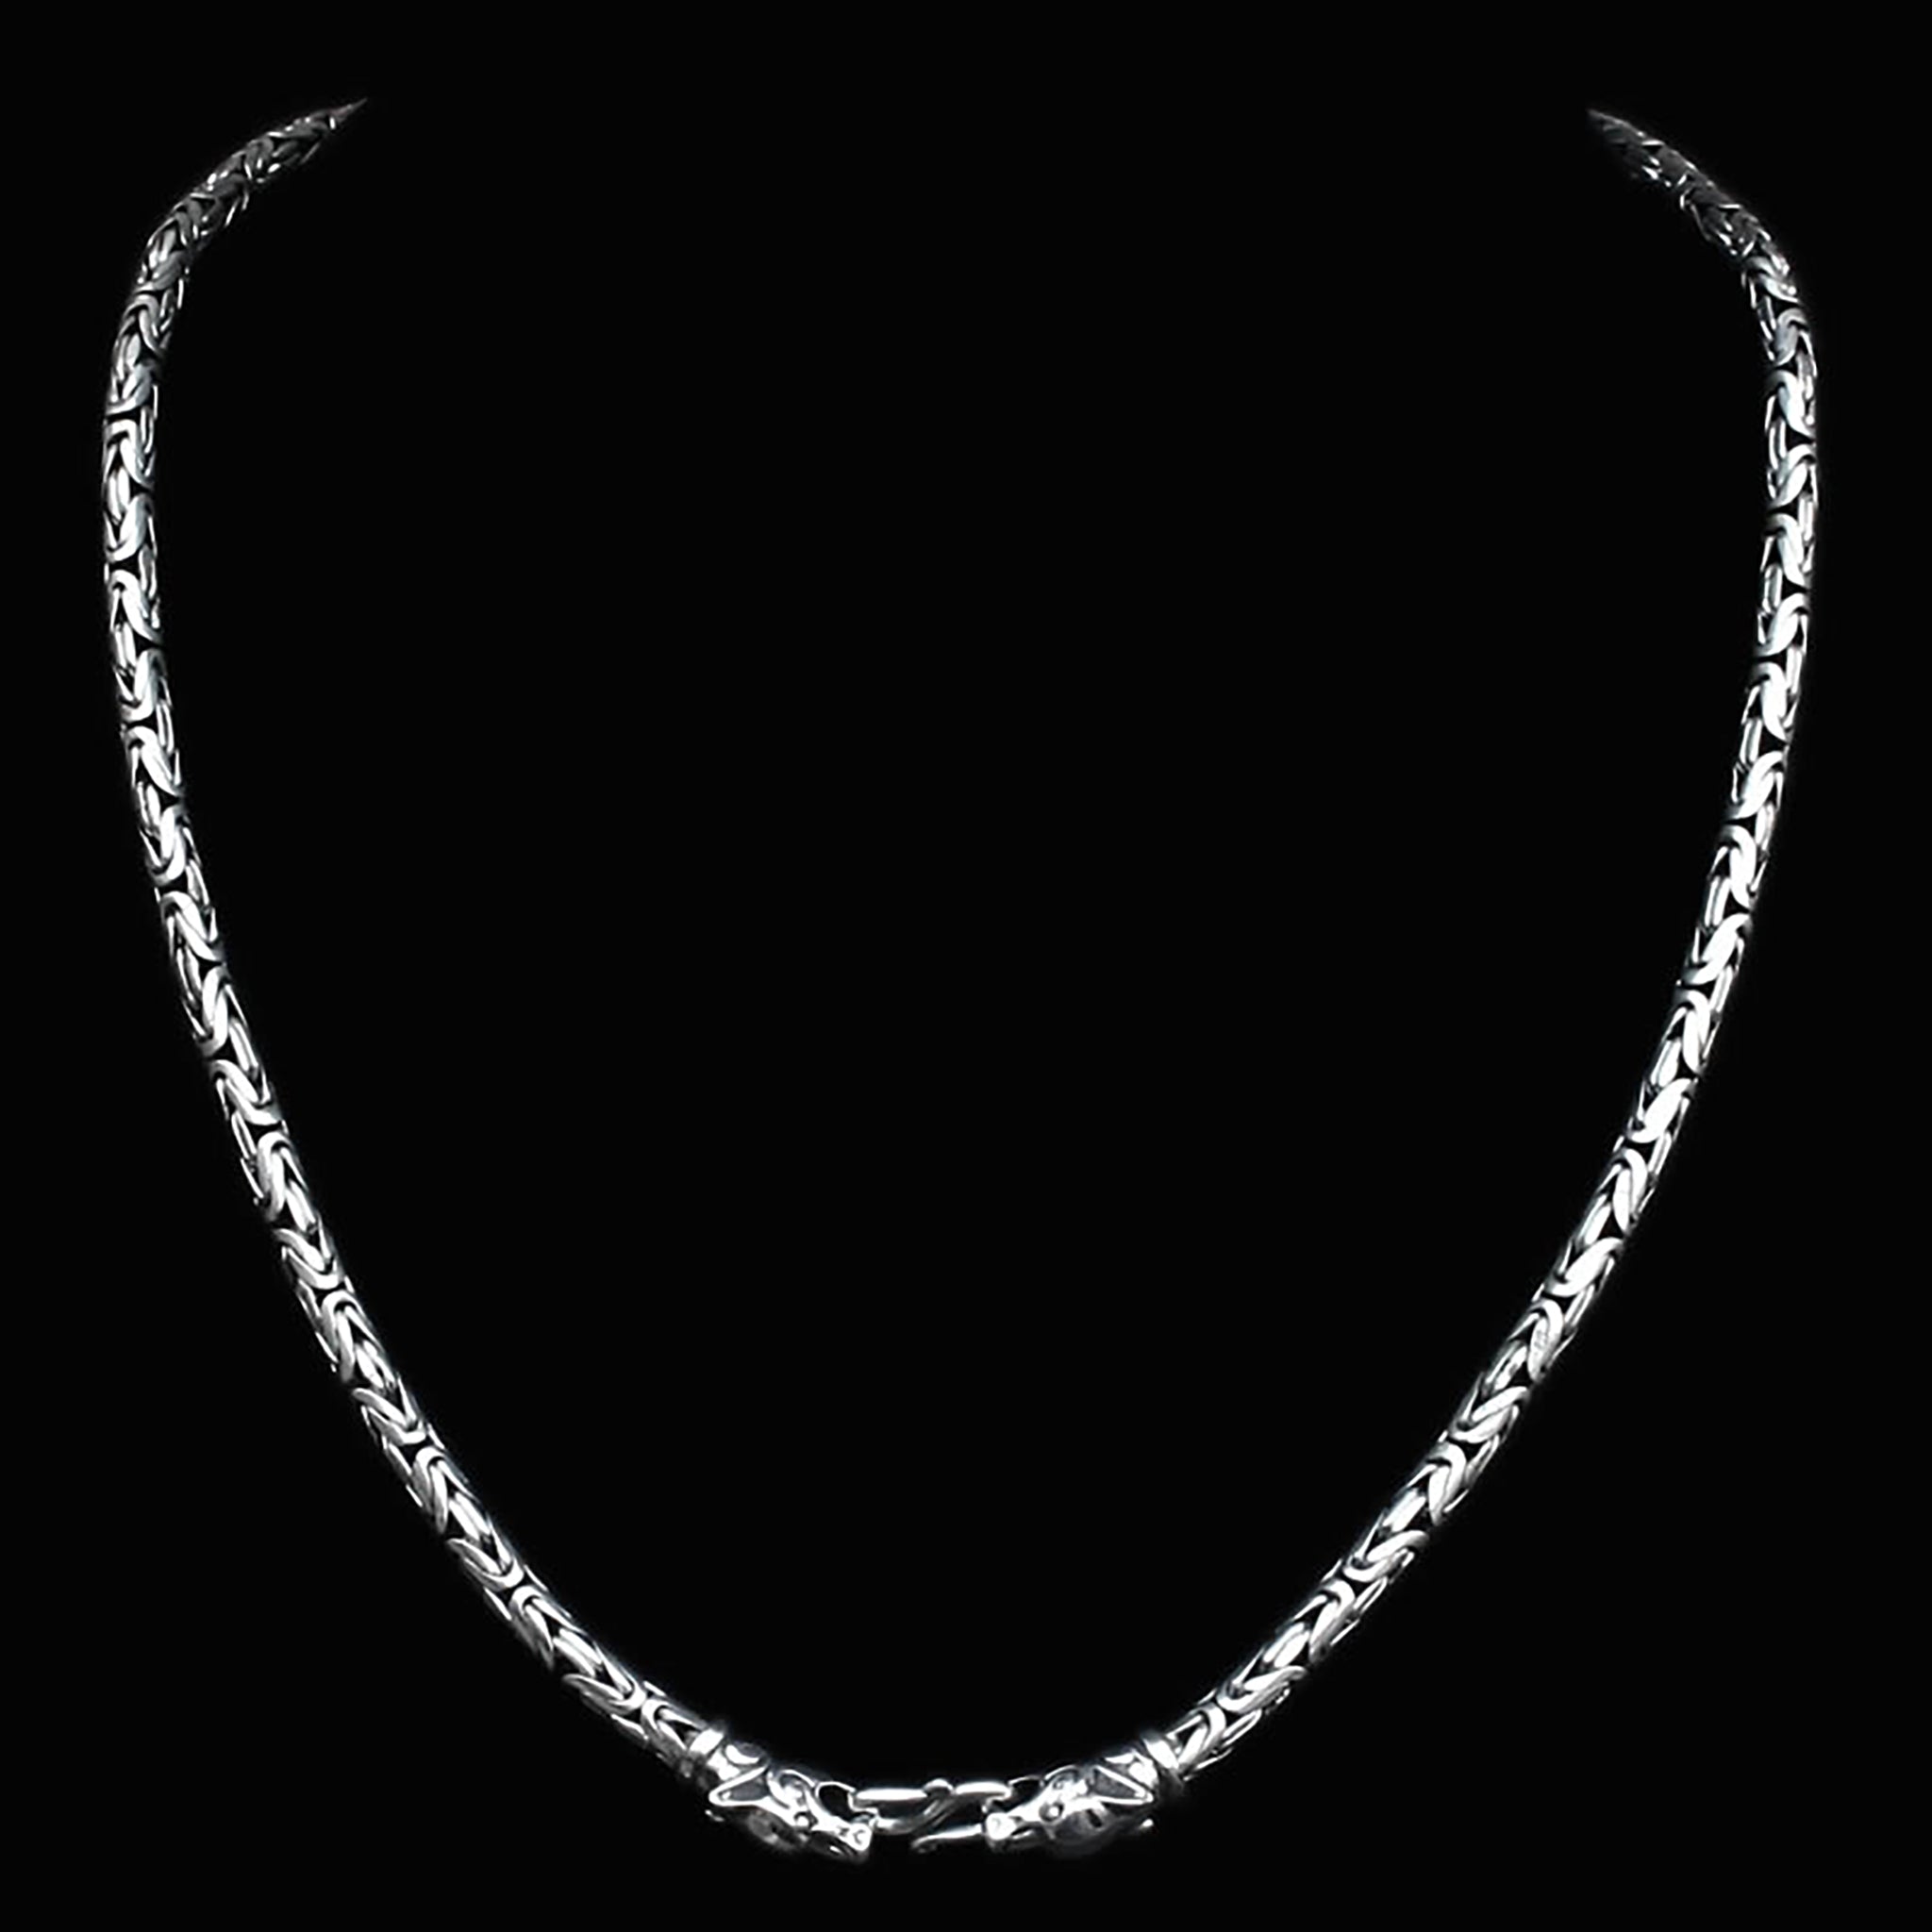 5mm Thick Silver King Chain Thors Hammer Necklace with Ferocious Wolf Heads